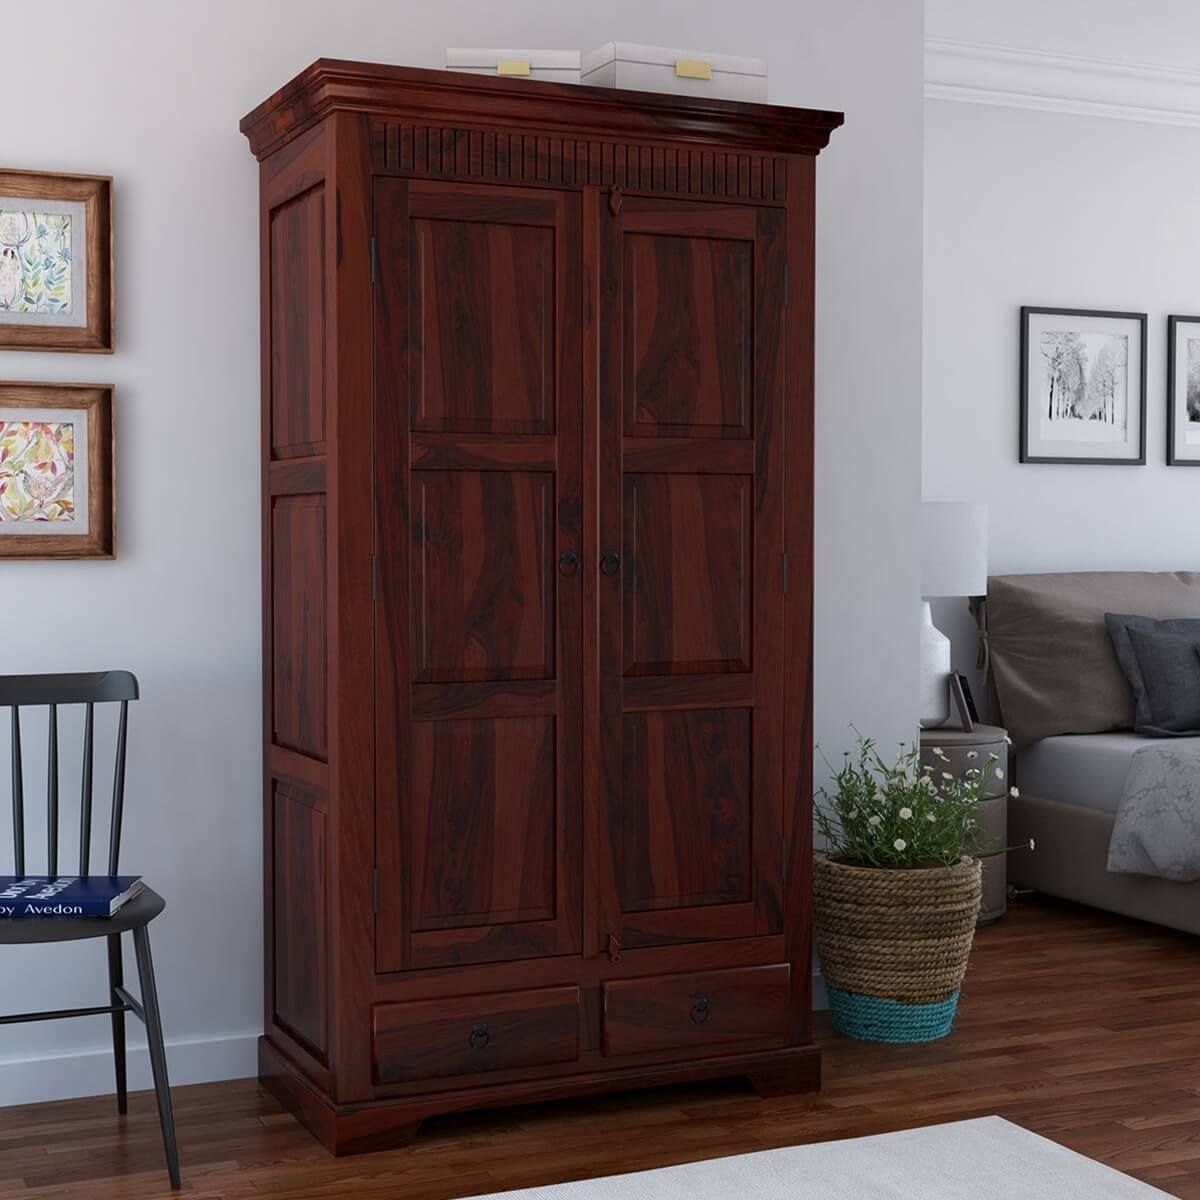 Marengo Rustic Solid Wood Large Wardrobe Armoire W Shelves And Drawers Intended For Large Wooden Wardrobes (View 14 of 15)